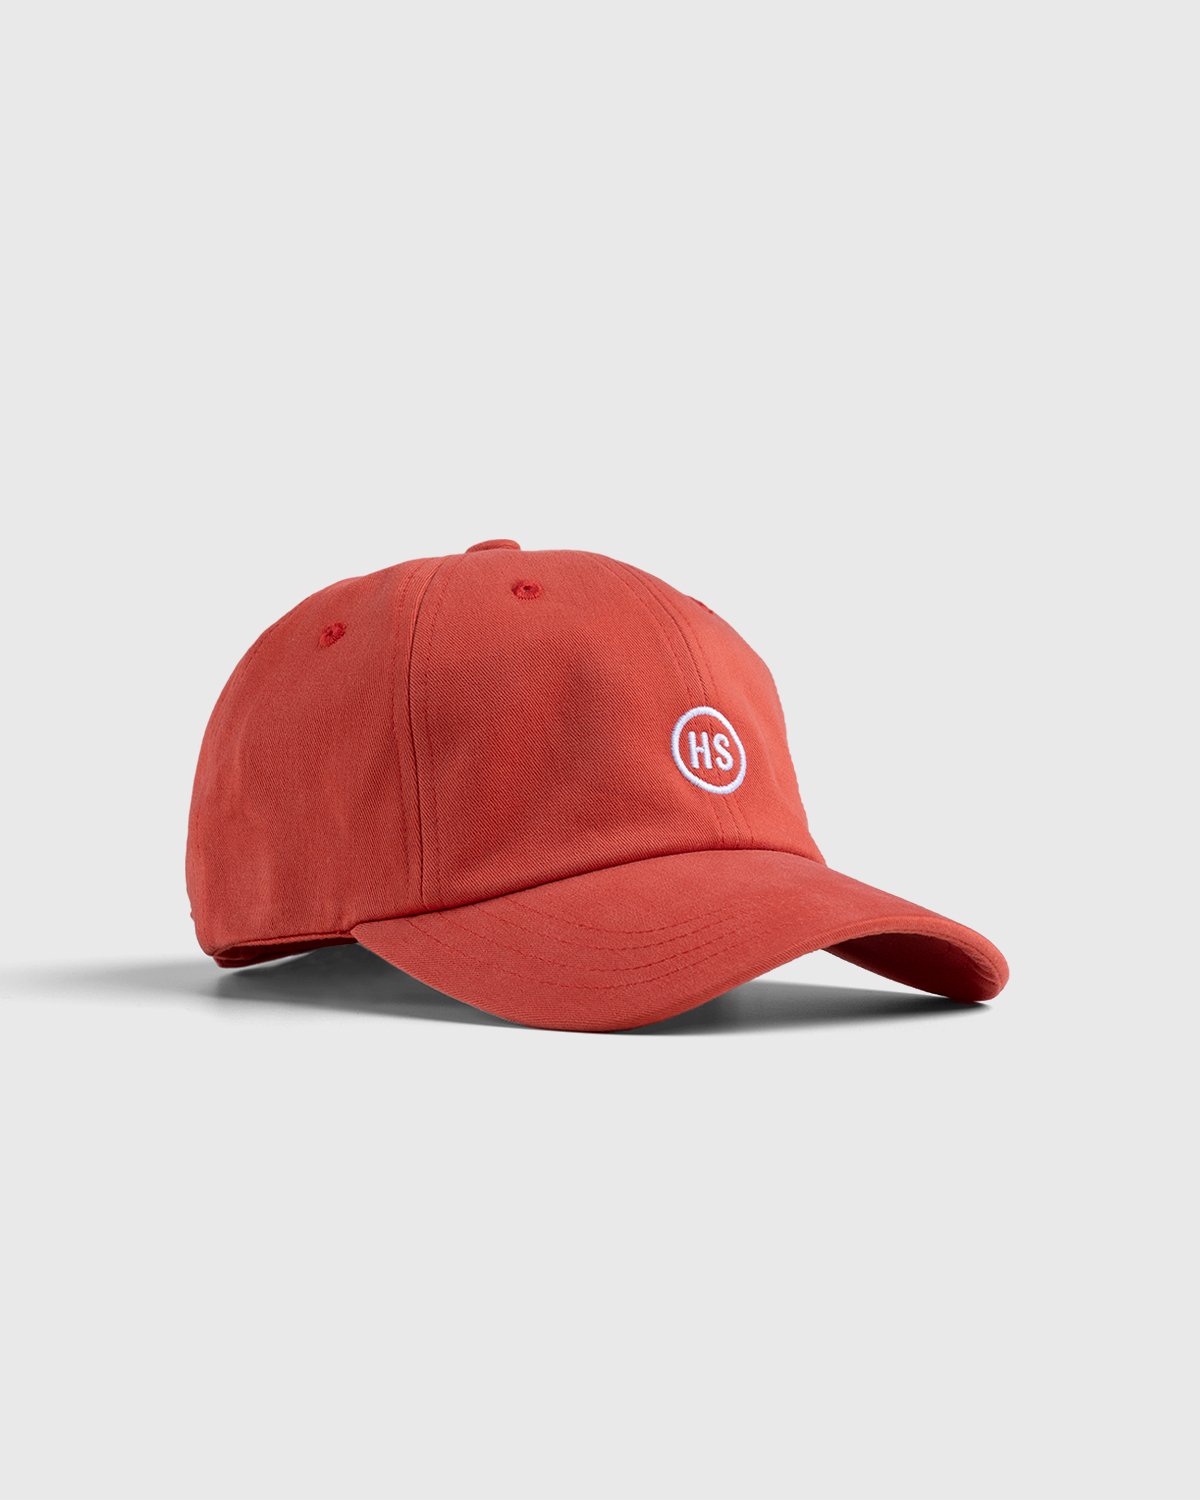 Highsnobiety - Baseball Cap Red - Accessories - Red - Image 1